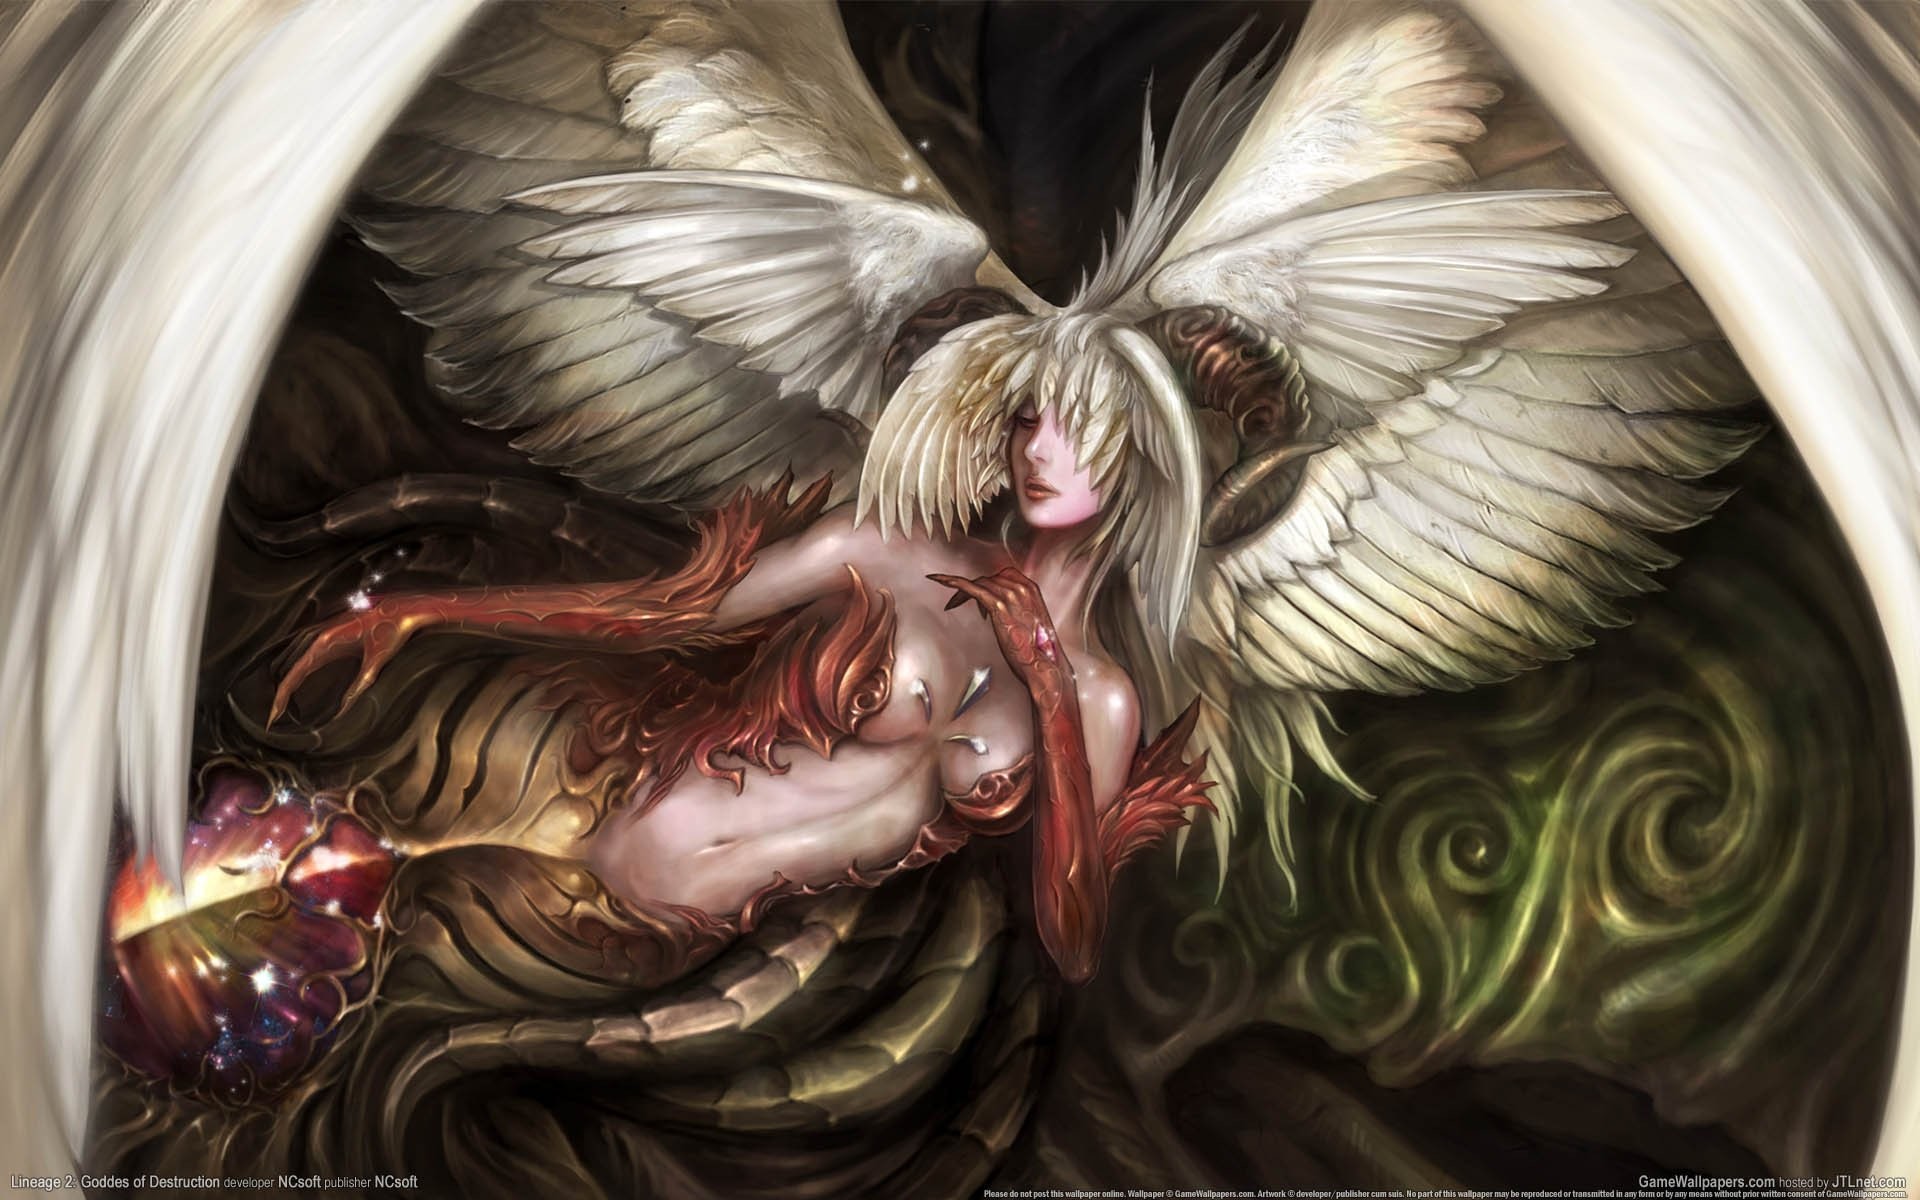 1920x1200 lineage 2: goddess of destruction game wallpapers fantasy wings magic girl  angel or demon girl